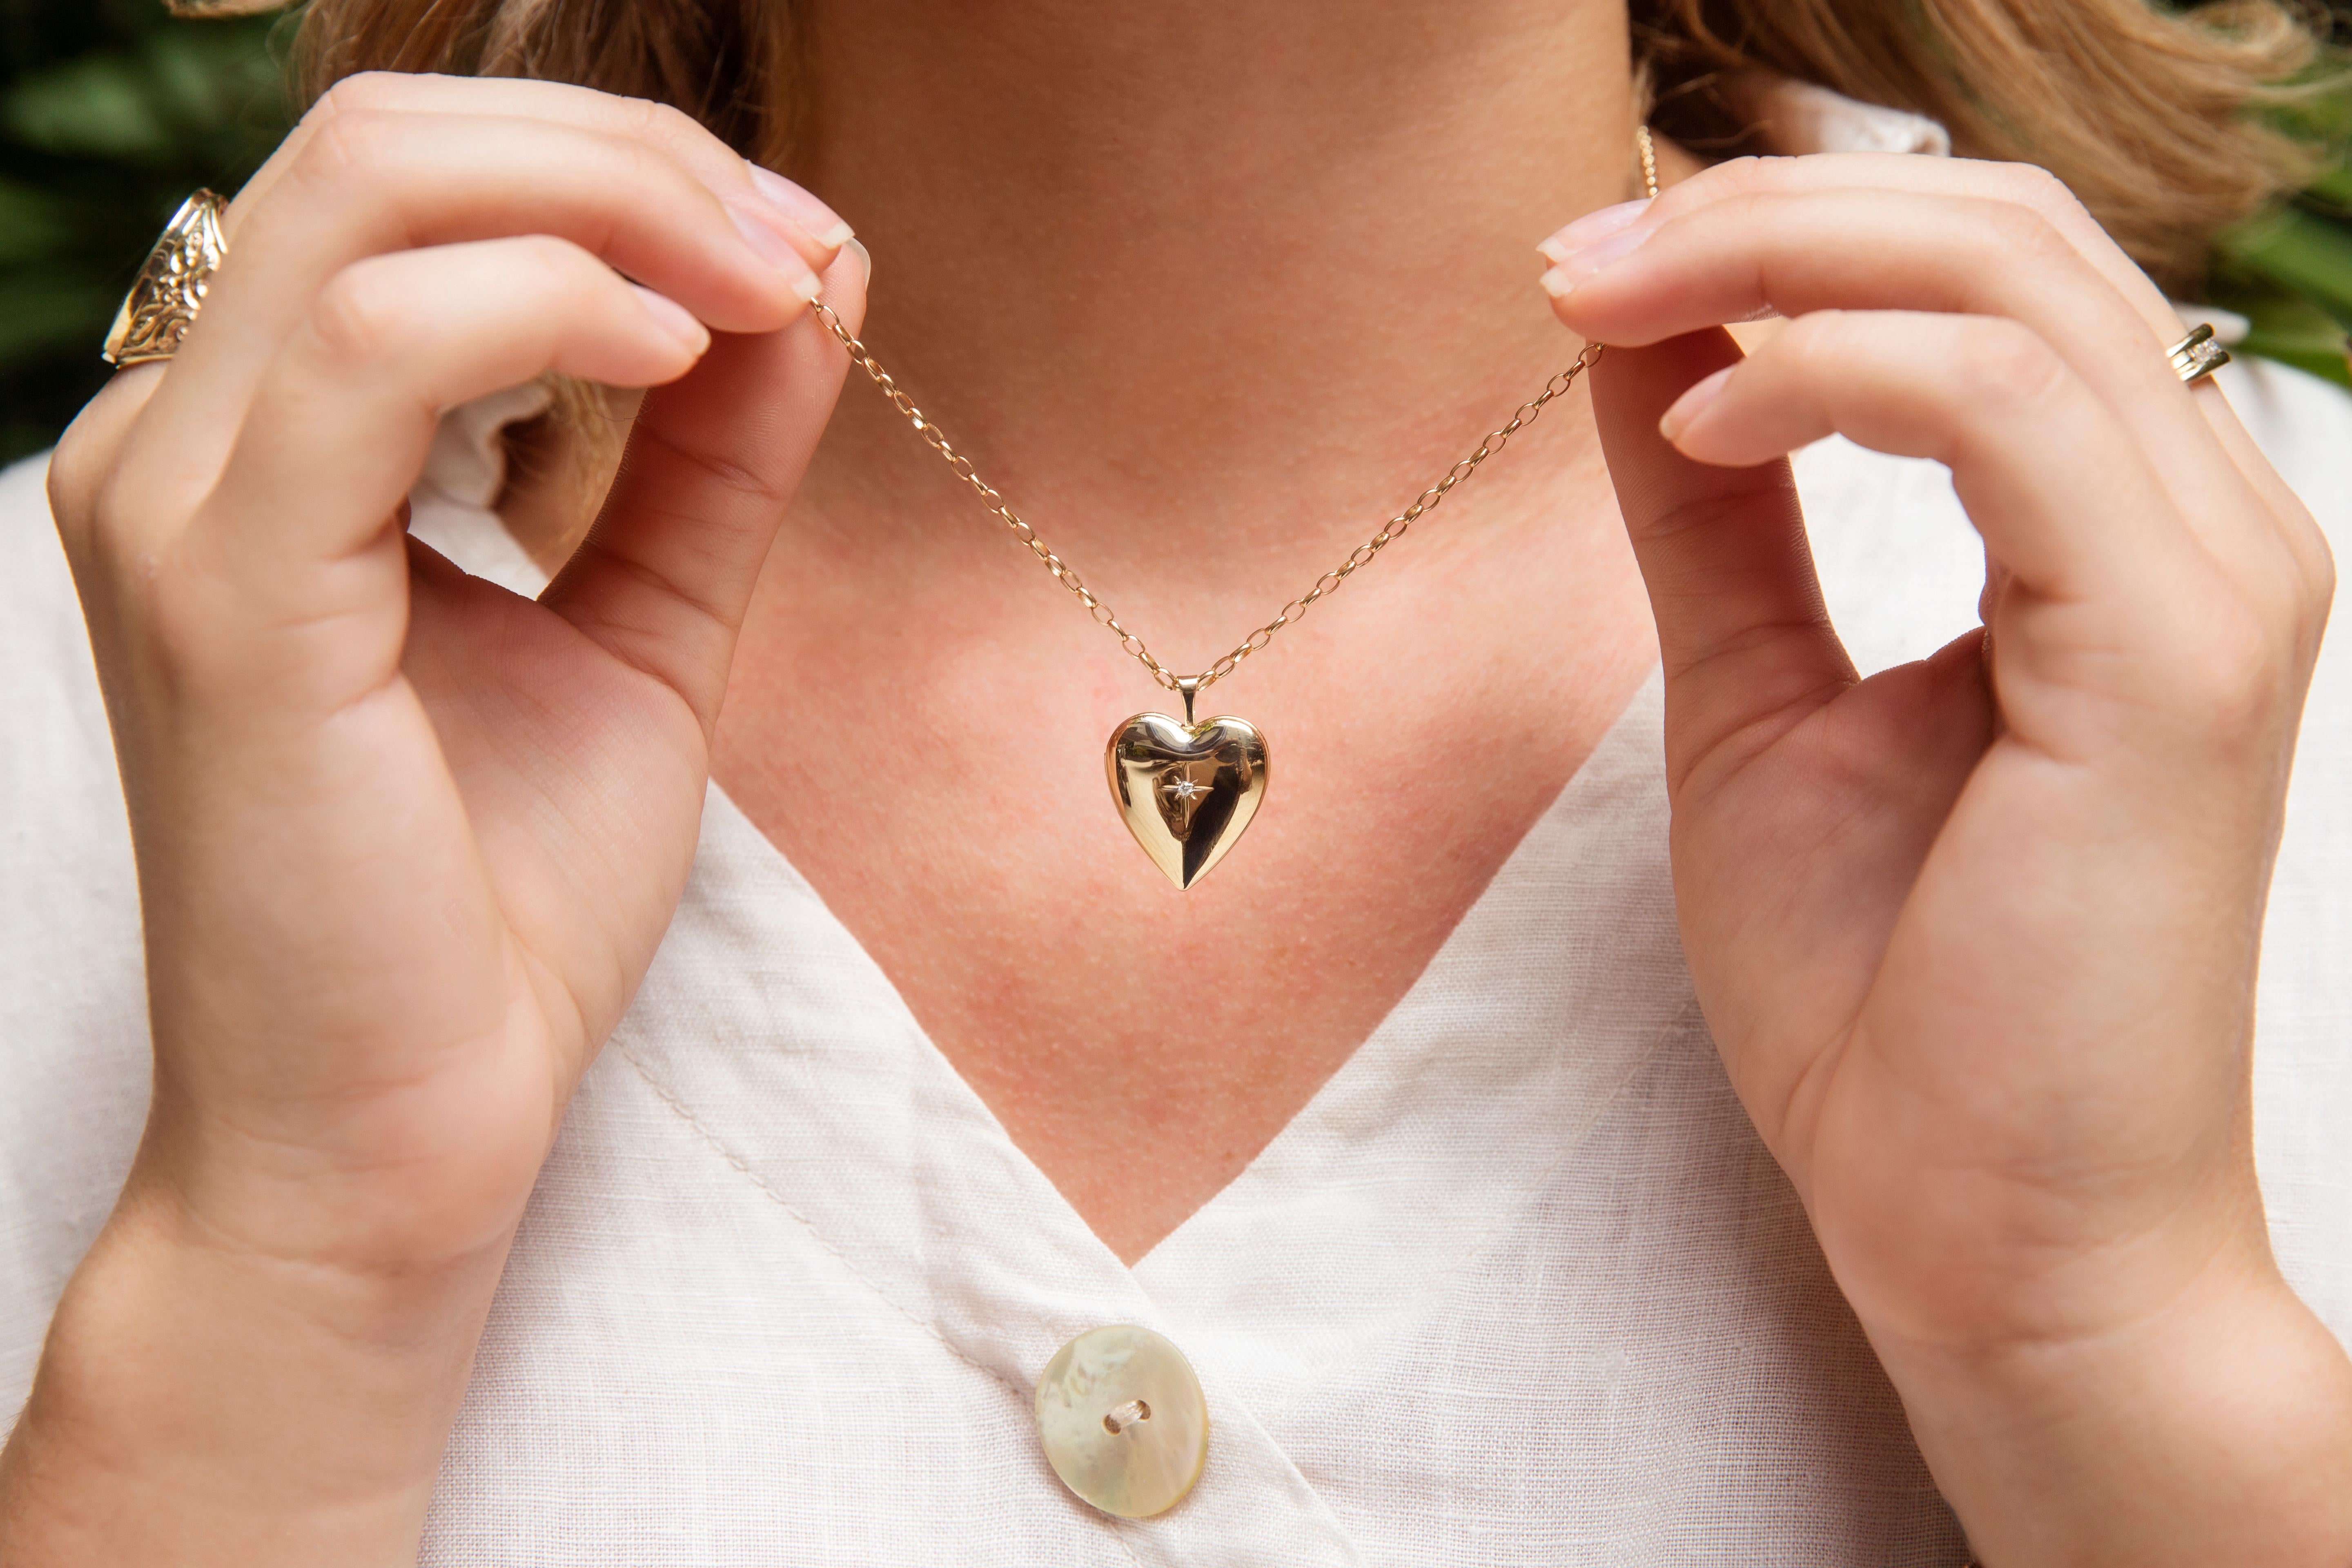 Crafted in 14 carat yellow gold, this gorgeous pendant is a heart-shaped locket with a darling star set diamond shimmering in the centre and threaded with an elegant 9 carat belcher chain. We have named her The Saige Pendant & Chain. As graceful as